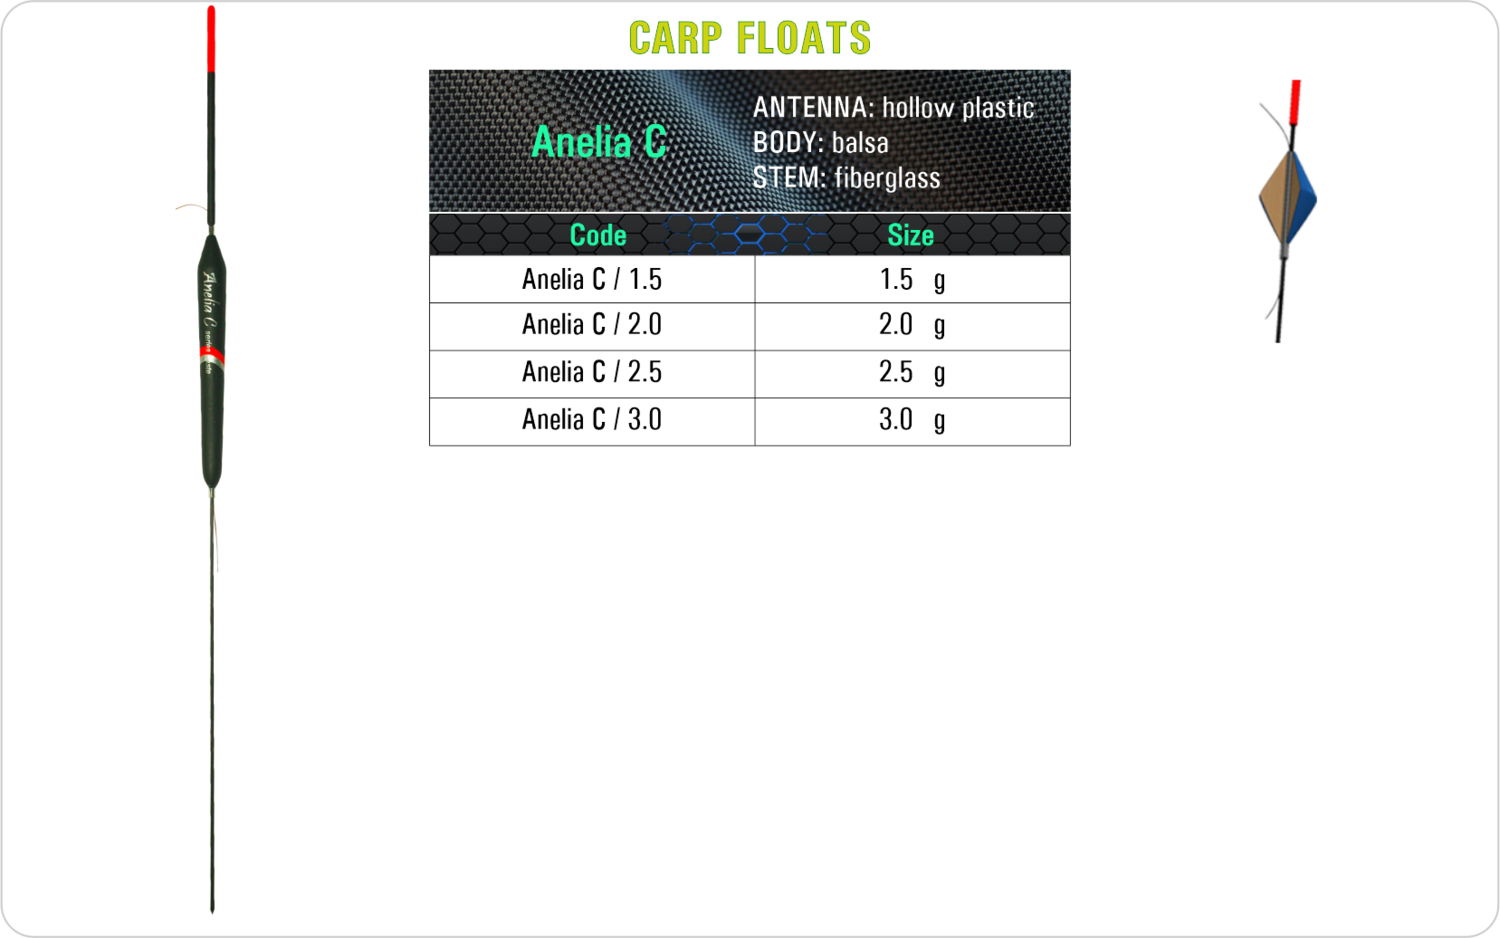 SF Anelia C Carp float model and table containing an additional information about this float with different codes, sizes, types of the body, the stem and the antenna of the float.